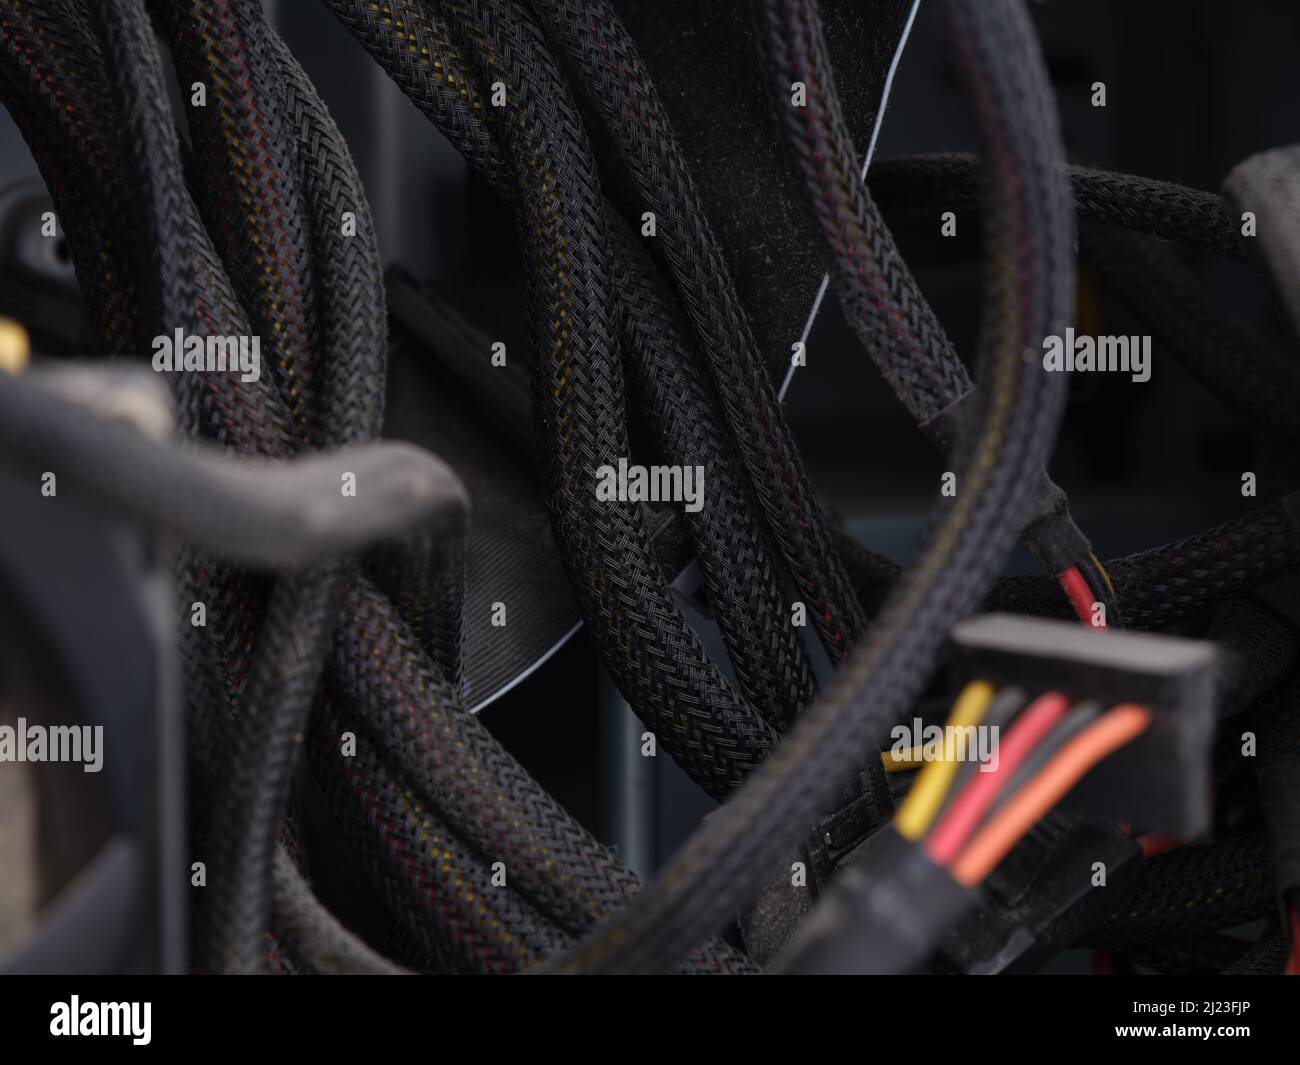 Some dusty power supply cables in a computer case with poor cable management. Close up. Stock Photo